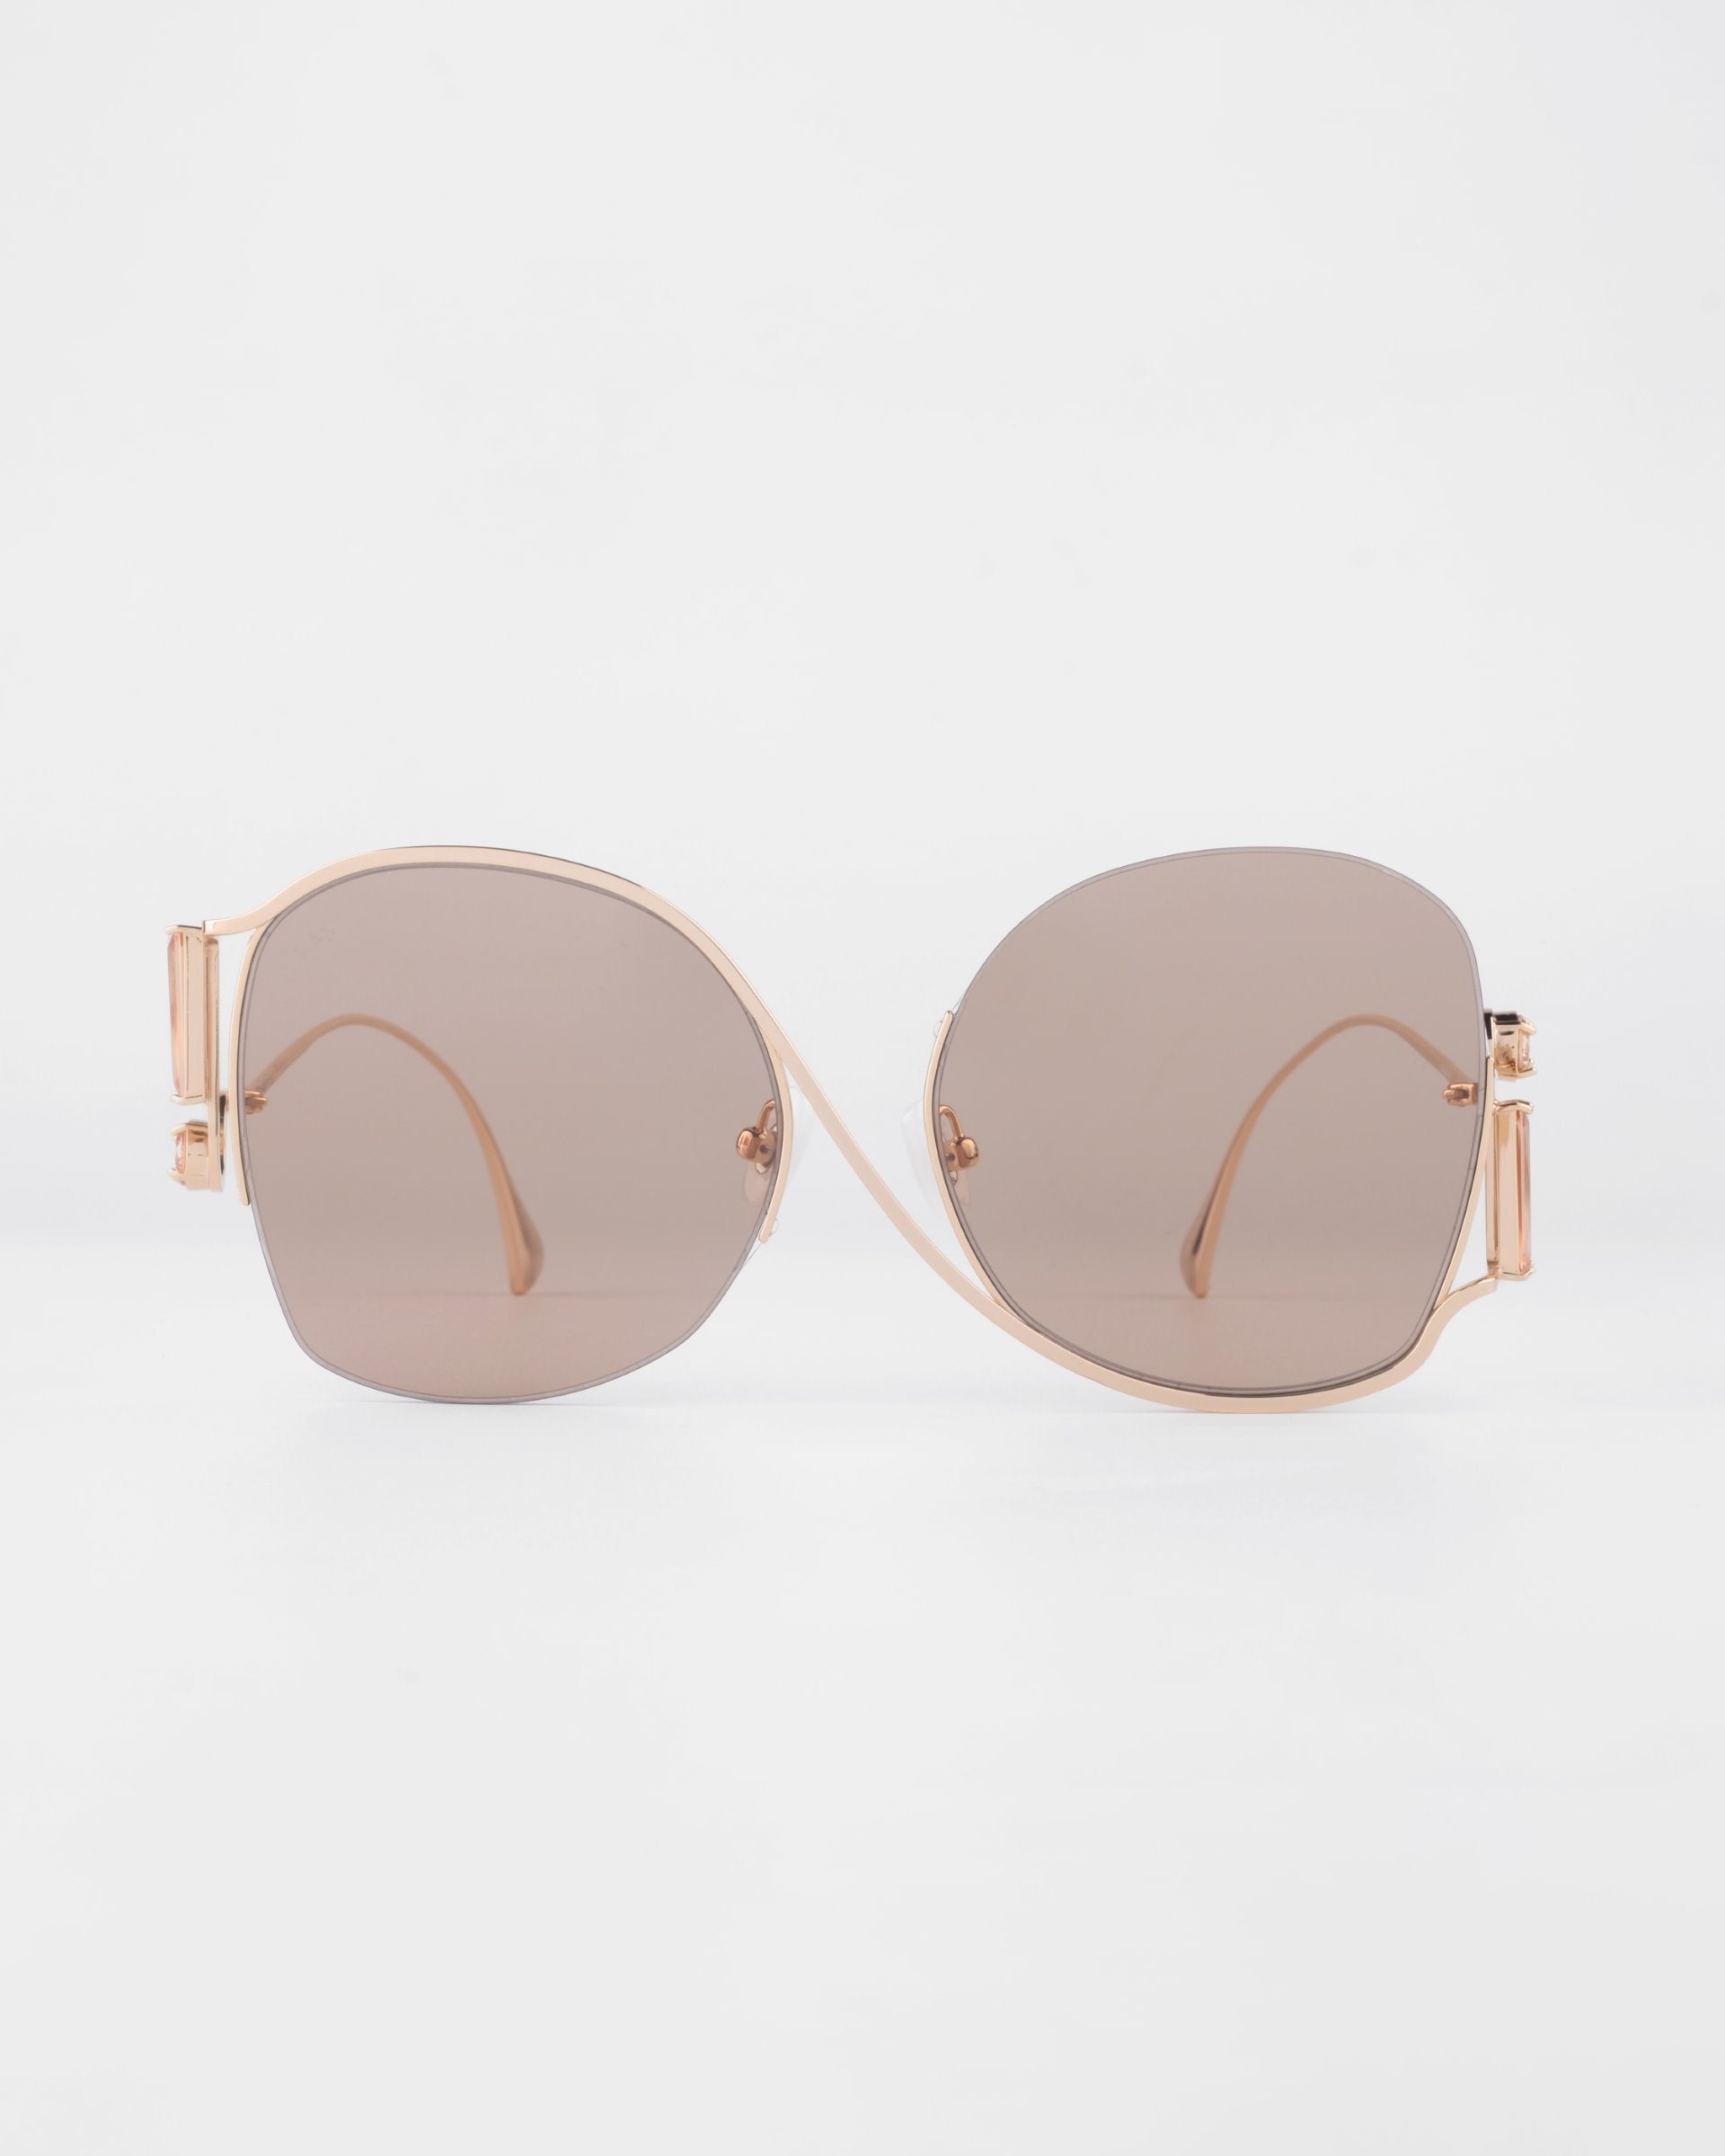 A pair of For Art's Sake® Sapphire sunglasses with large, light brown lenses and thin, gold-colored frames. The Sapphire sunglasses, offering UV protection, are positioned symmetrically against a plain white background.